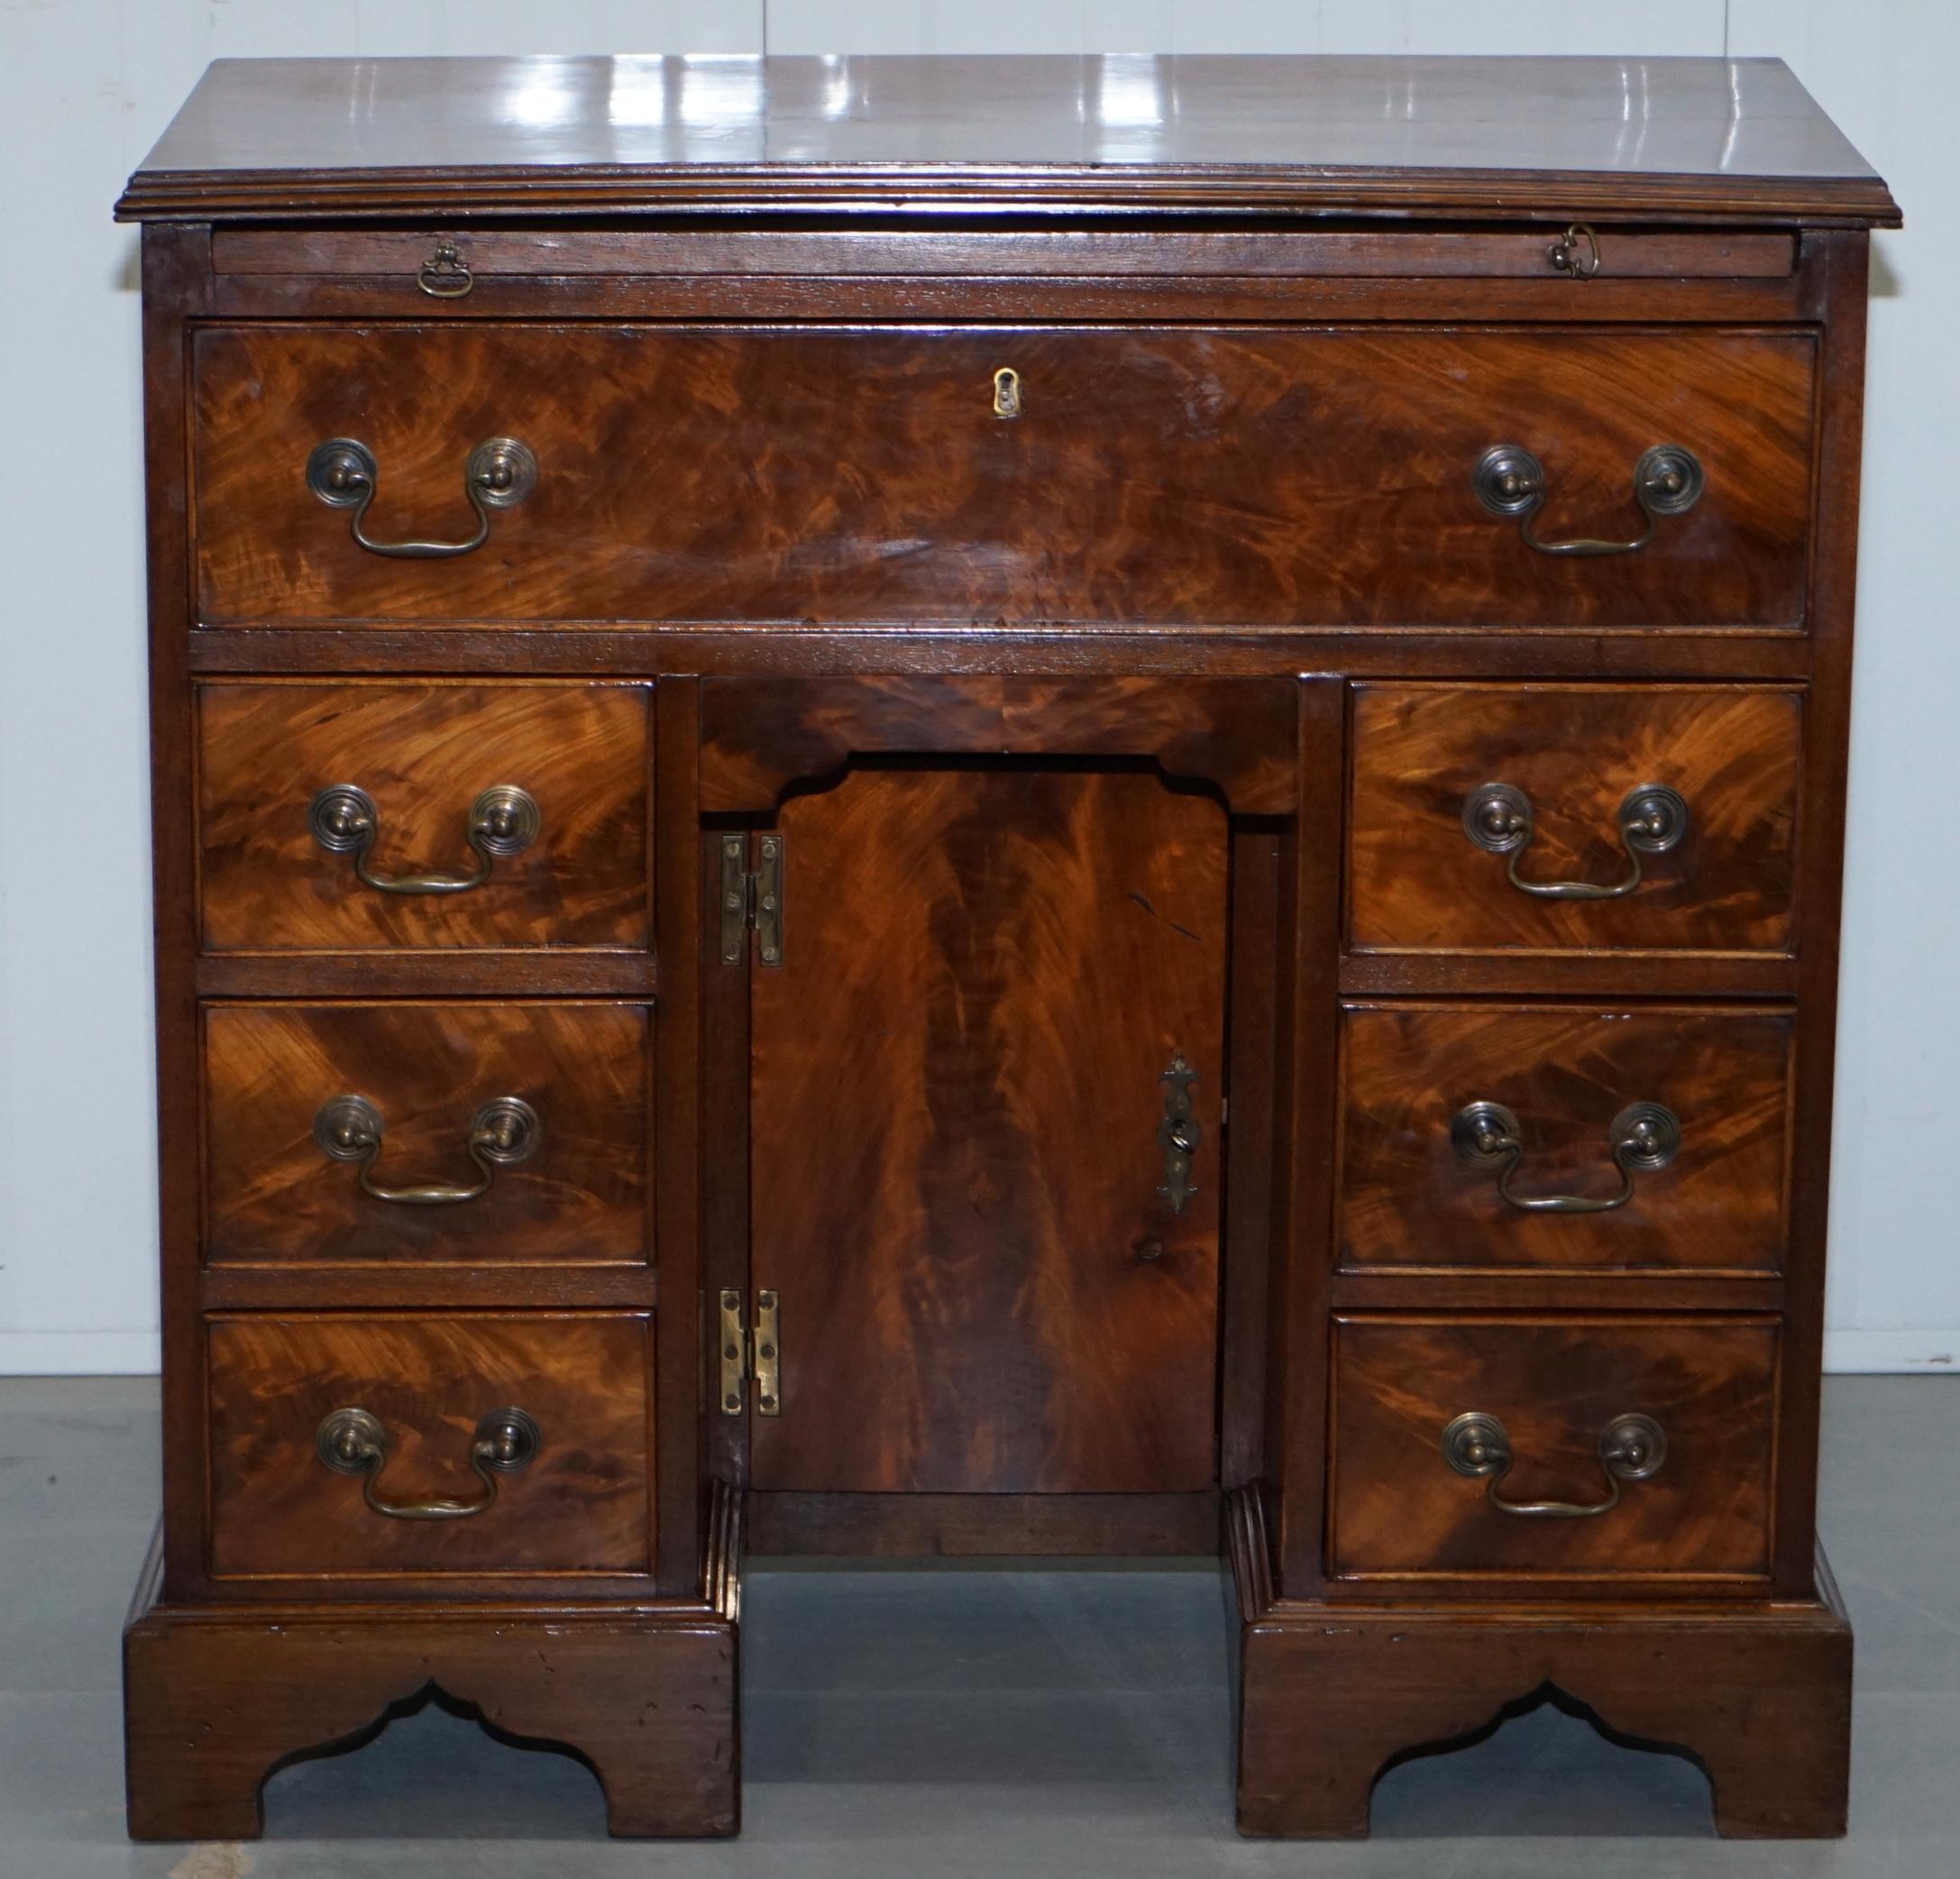 We are delighted to offer for sale this lovely early Georgian flamed Mahogany kneehole desk with sliding writing section 

A well made and decorative piece, the flamed mahogany is stunning to look at from every angle. Naturally, the knee hole is